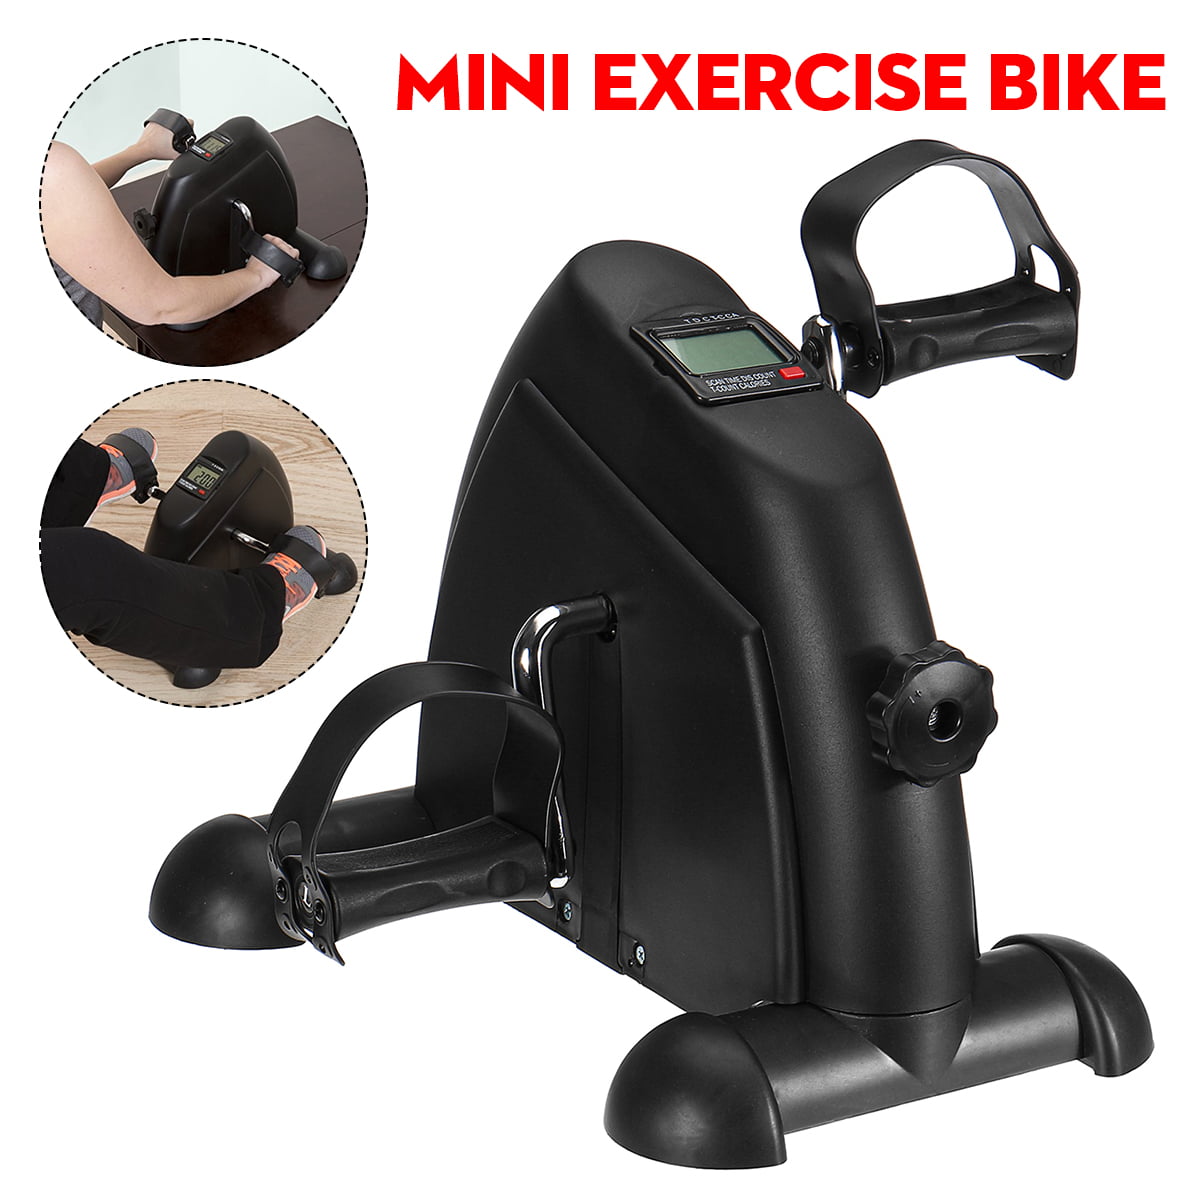 Under Desk Pedal Exerciser Portable Compact Fitness Pedal Exercise Machine Bike 